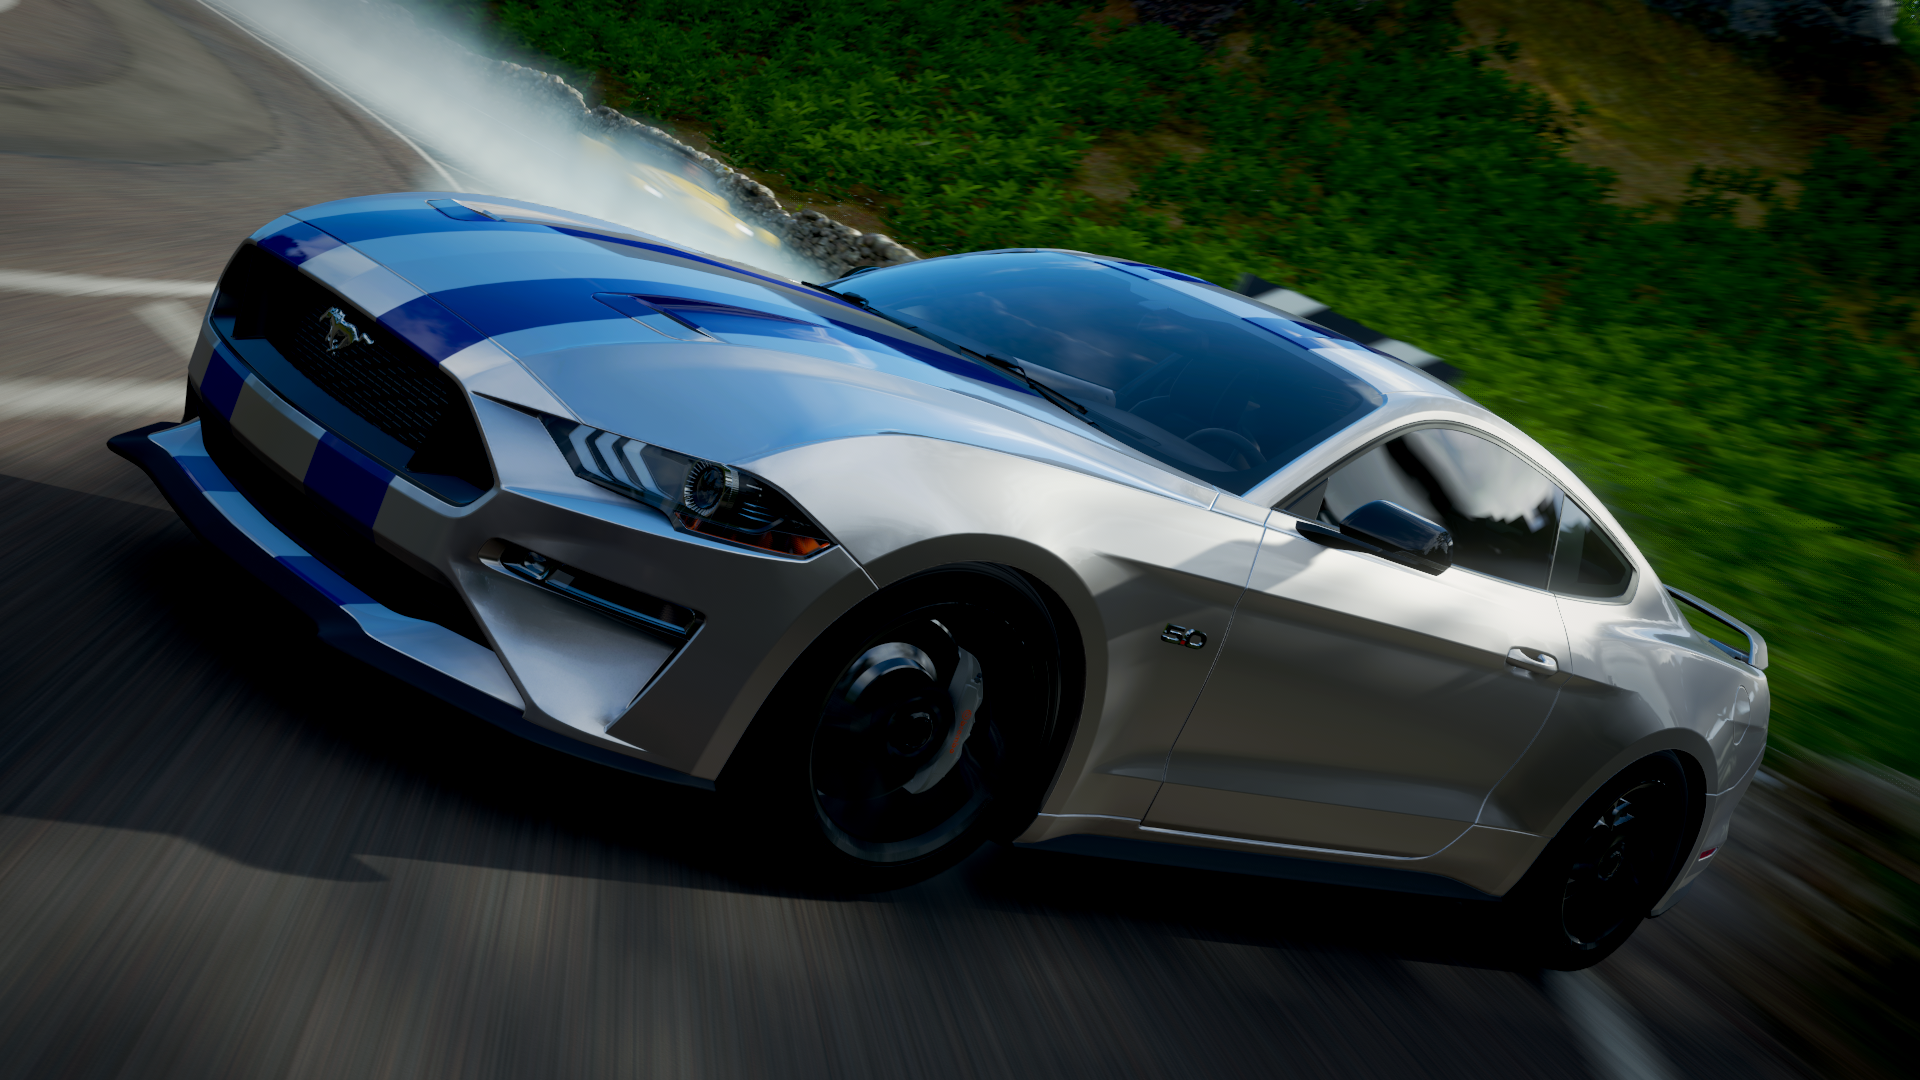 Shelby Car Ford Ford Mustang Forza Horizon 4 CGi Video Games Road Side View 1920x1080